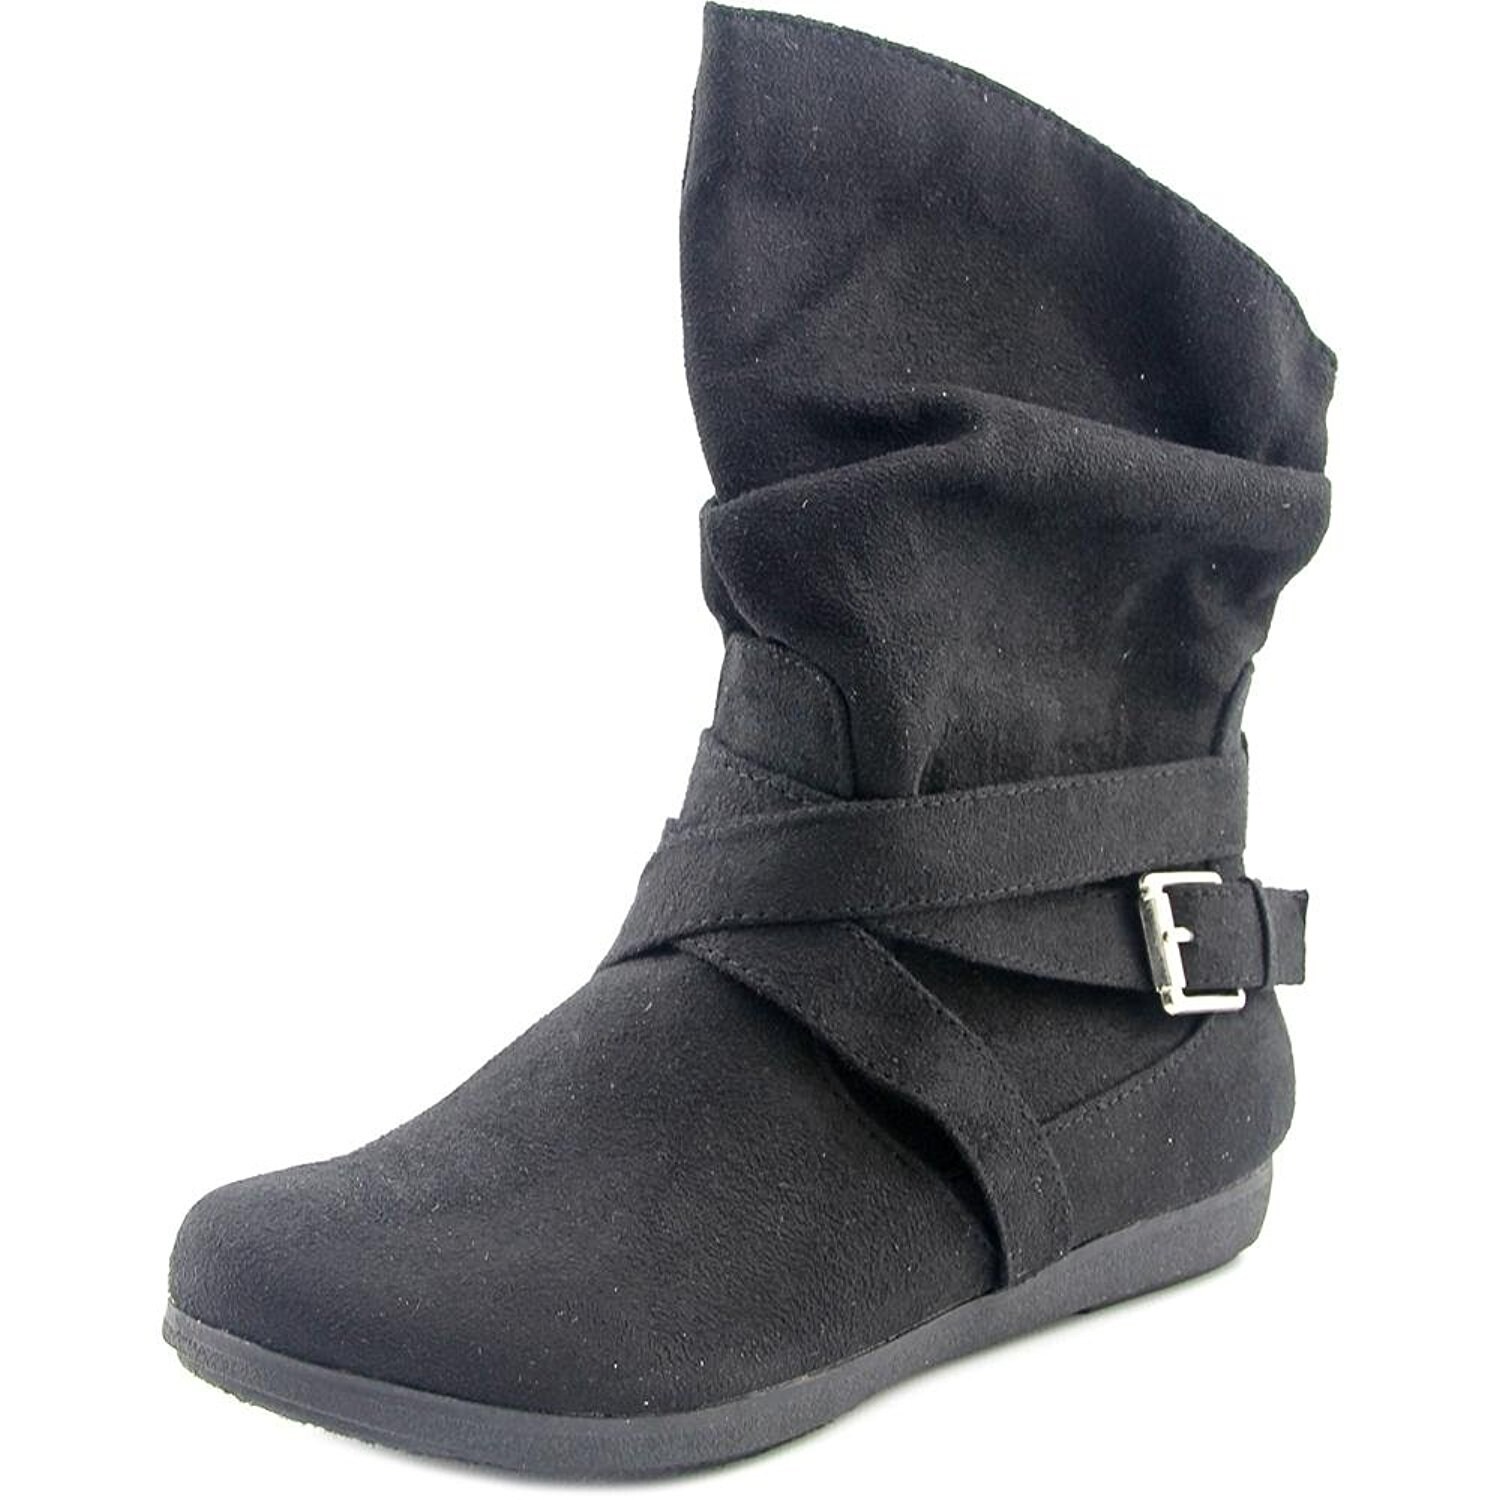 rampage mid calf boots